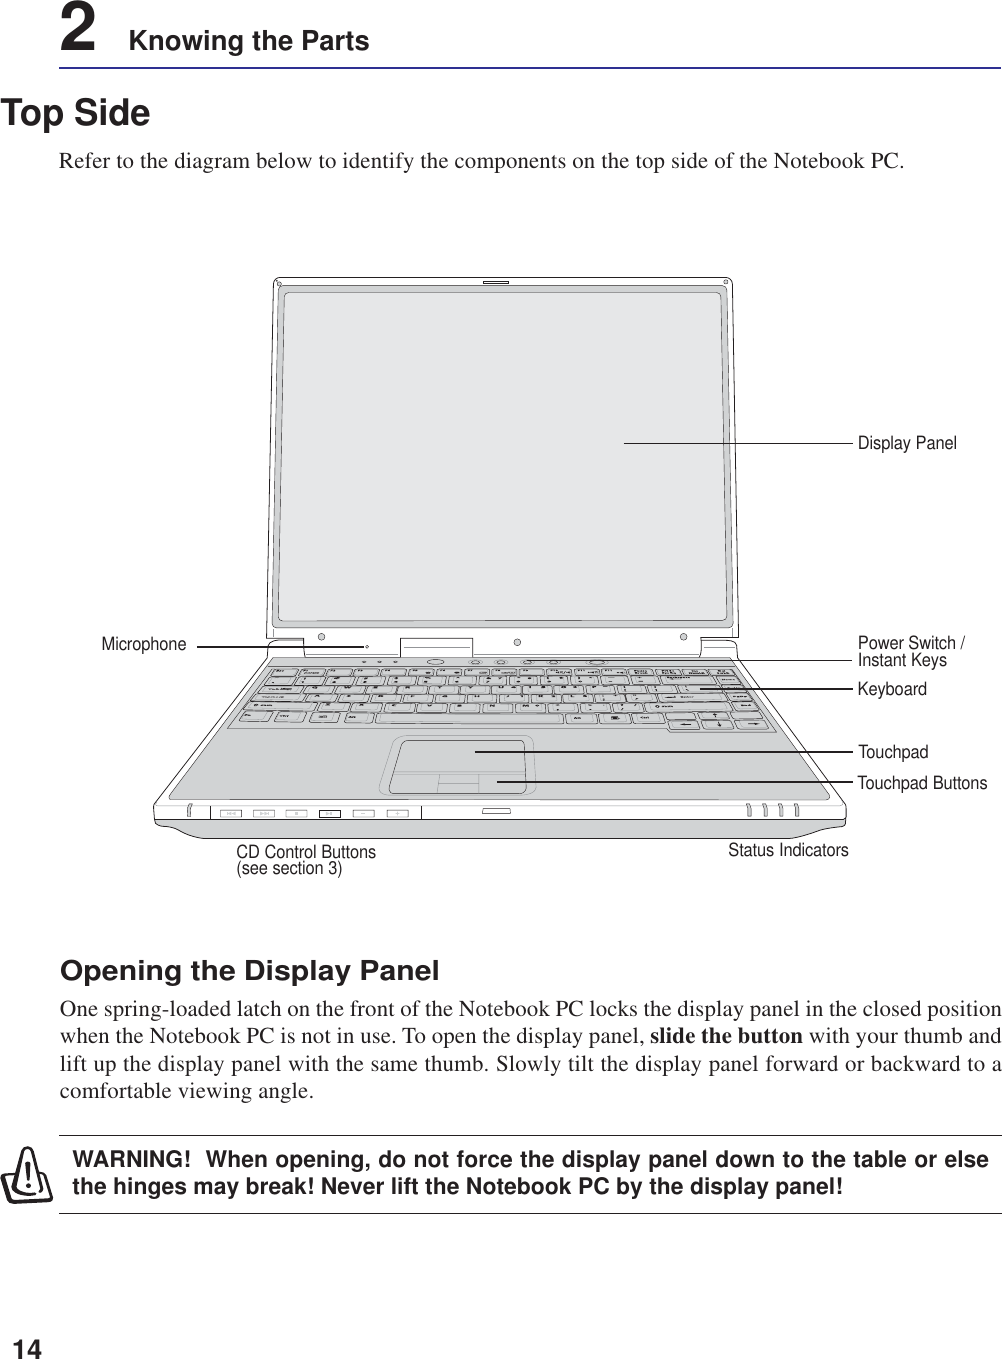 142    Knowing the PartsTop SideRefer to the diagram below to identify the components on the top side of the Notebook PC.Display PanelTouchpad ButtonsKeyboardTouchpadPower Switch /Instant KeysStatus IndicatorsMicrophoneCD Control Buttons(see section 3)Opening the Display PanelOne spring-loaded latch on the front of the Notebook PC locks the display panel in the closed positionwhen the Notebook PC is not in use. To open the display panel, slide the button with your thumb andlift up the display panel with the same thumb. Slowly tilt the display panel forward or backward to acomfortable viewing angle.WARNING!  When opening, do not force the display panel down to the table or elsethe hinges may break! Never lift the Notebook PC by the display panel!